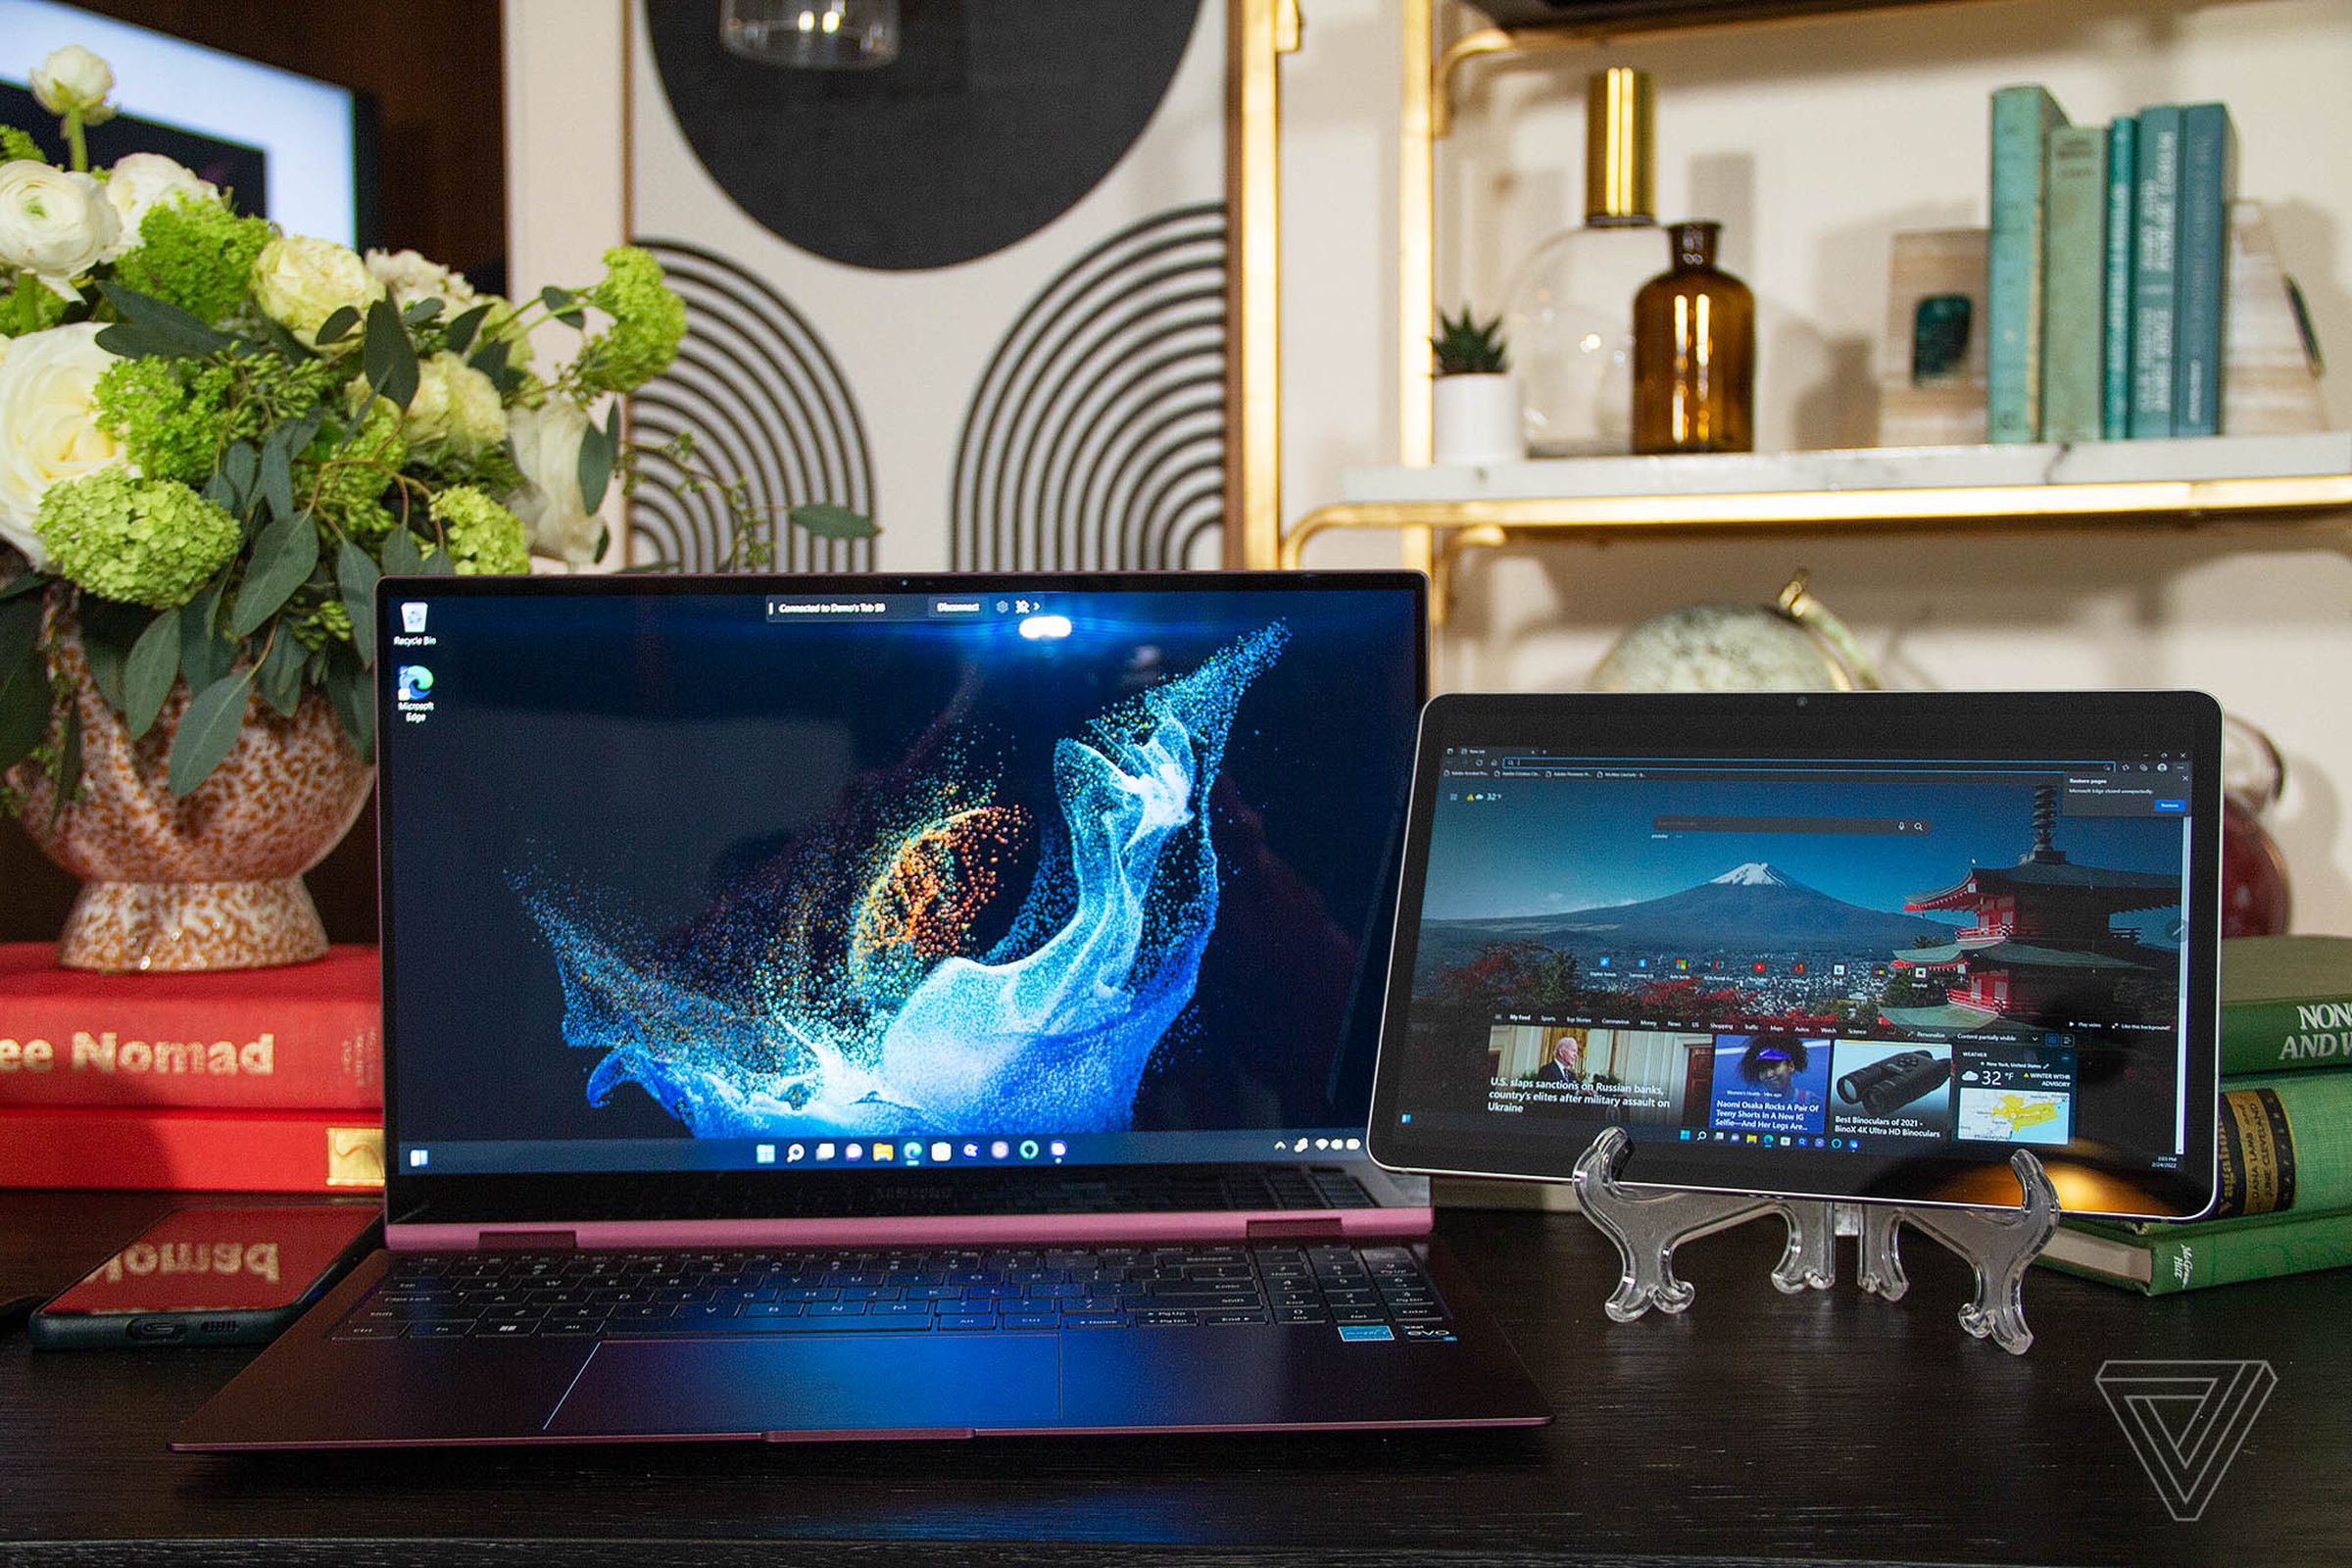 The Samsung Galaxy Book 2 Pro 360 next to a Samsung Galaxy Tab S8. The Galaxy Book displays a blue supernova on a black background. The Tab S8 displays a Microsoft Edge homepage.